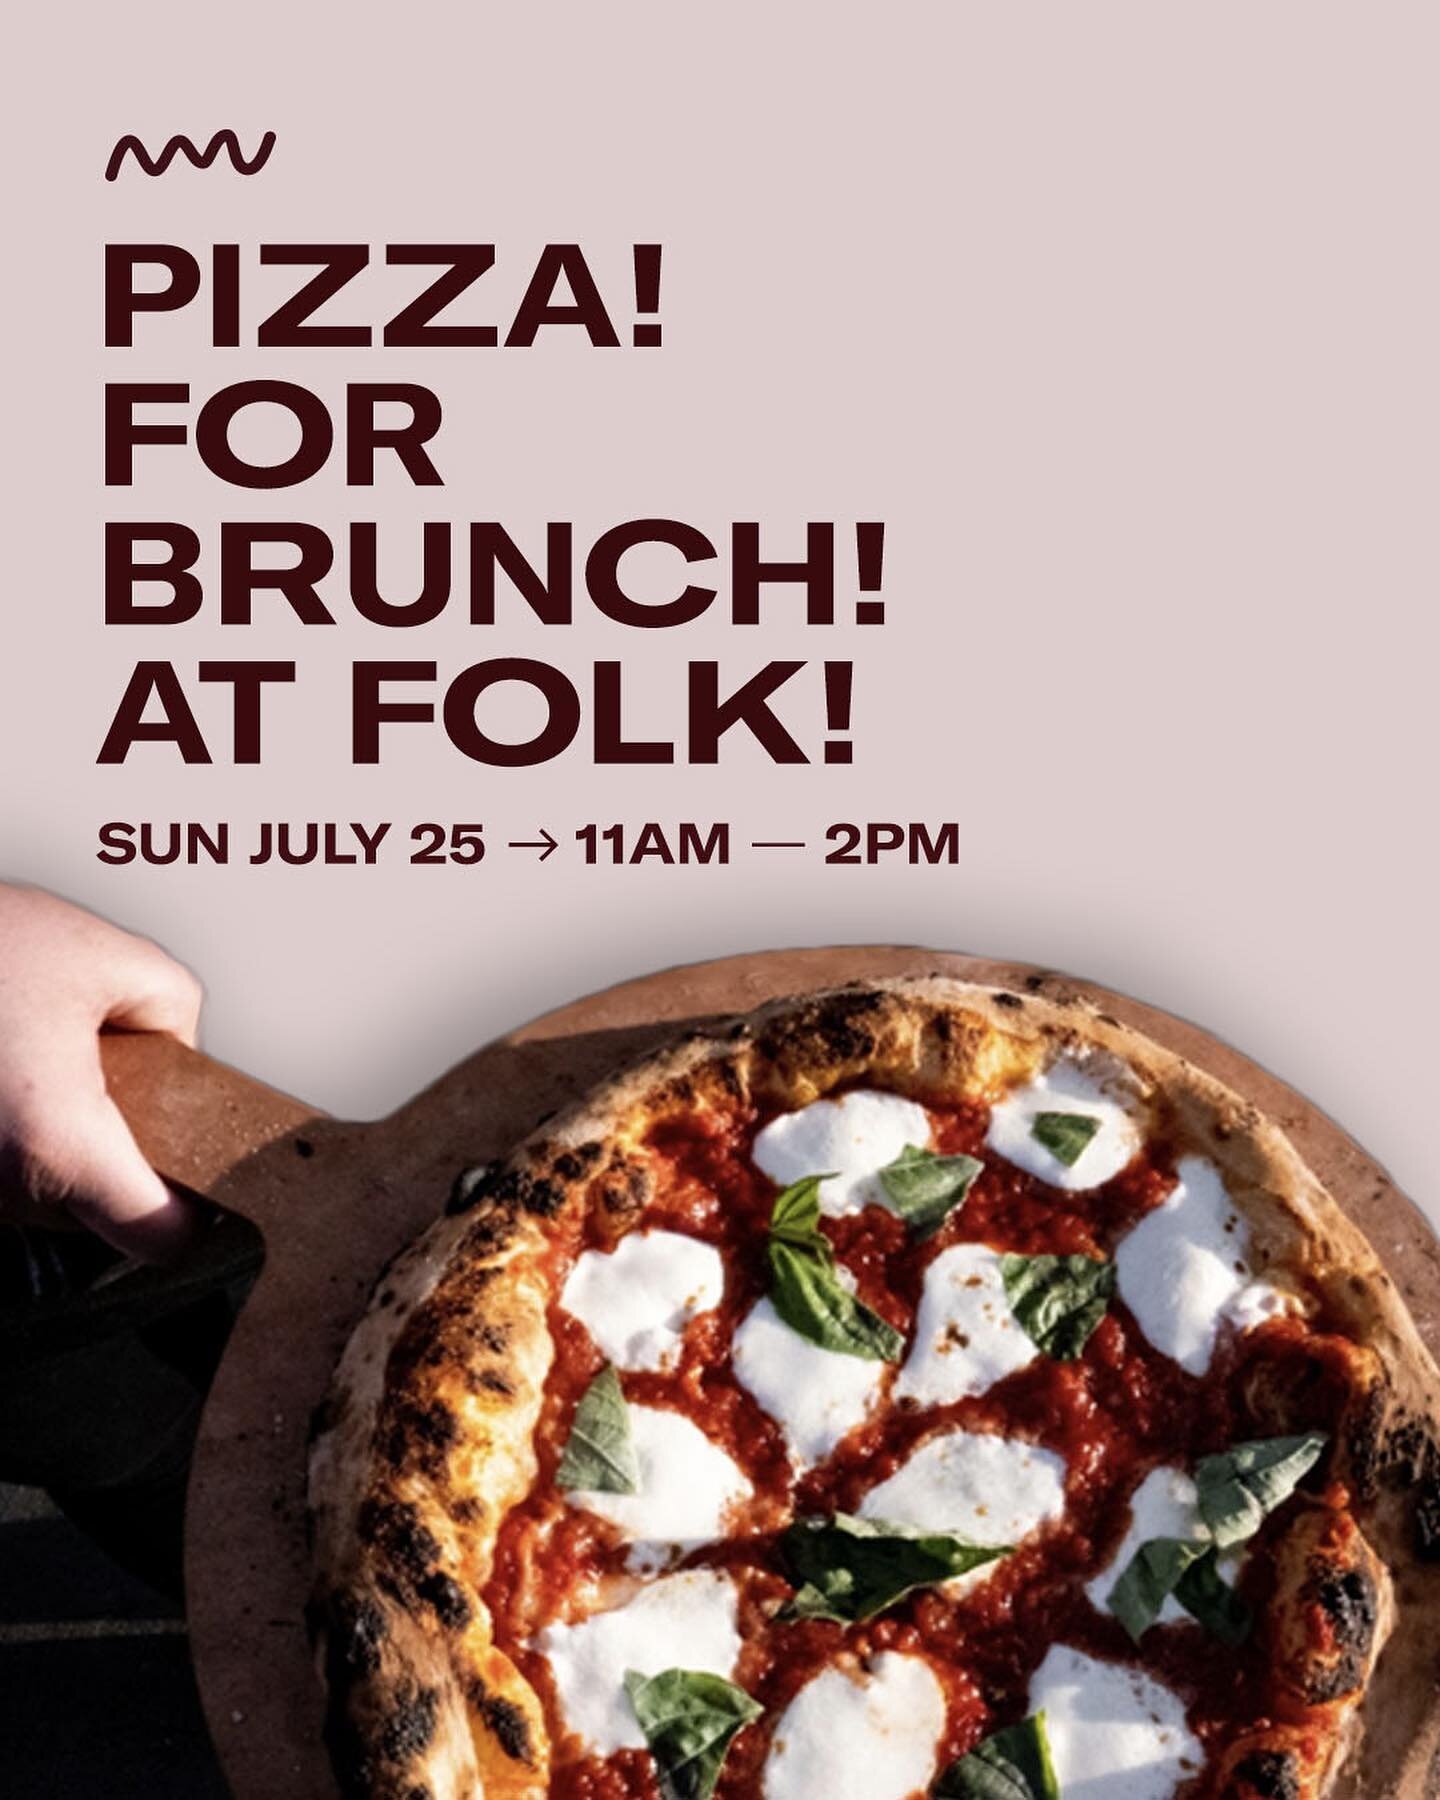 hey you, wyd sunday? 

Popping up @folkdetroit this Sunday for our first ever brunch! Come through with your crew and let us feed you. Folk has a lineup of coffee, wine, and na drinks for your brunching pleasure. They&rsquo;ll be slinging from their 